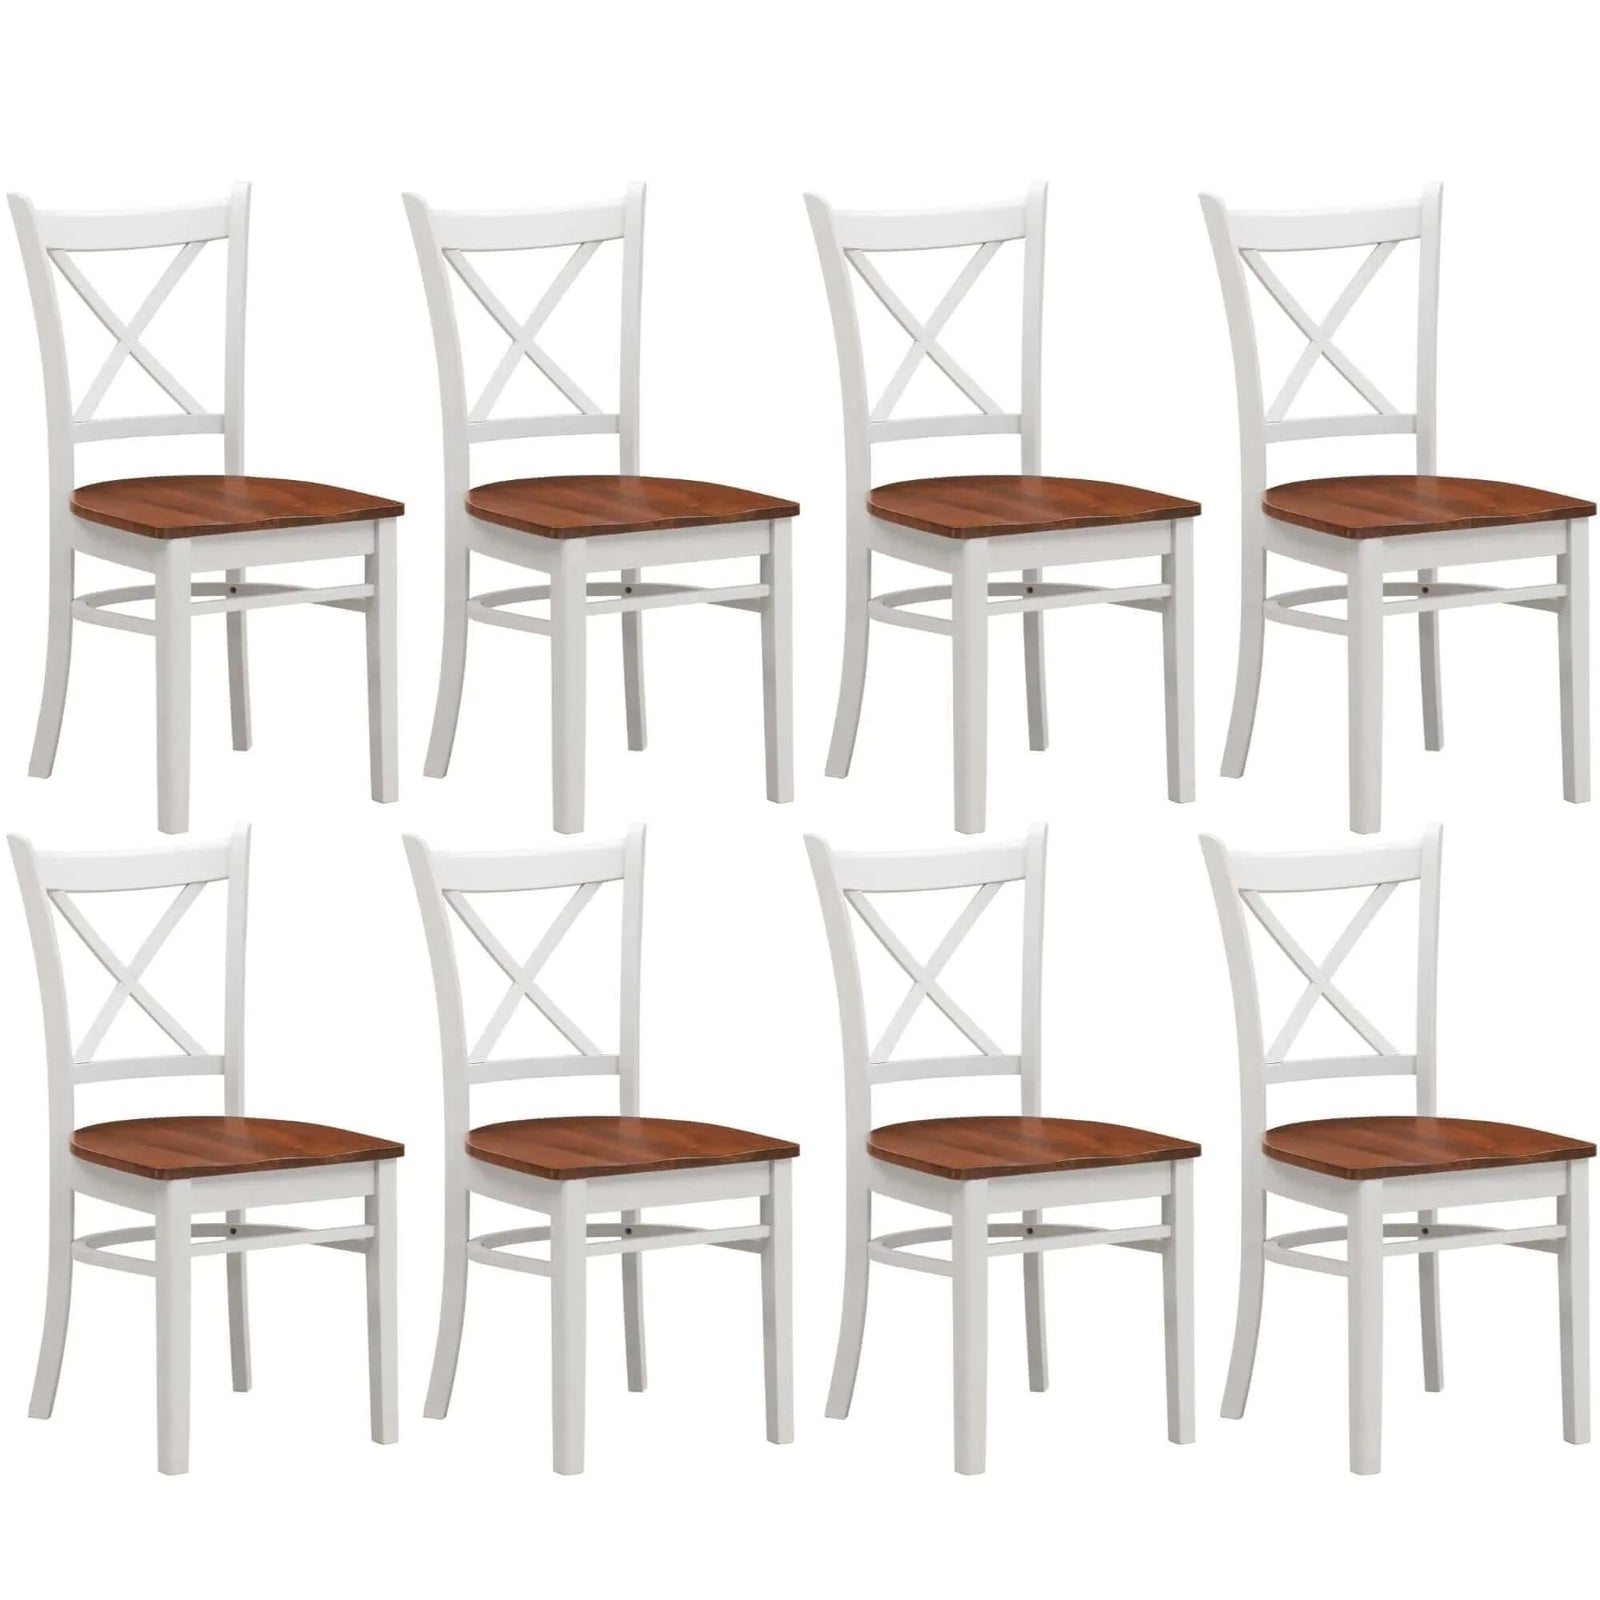 Buy lupin dining chair set of 8 crossback solid rubber wood furniture - white oak - upinteriors-Upinteriors